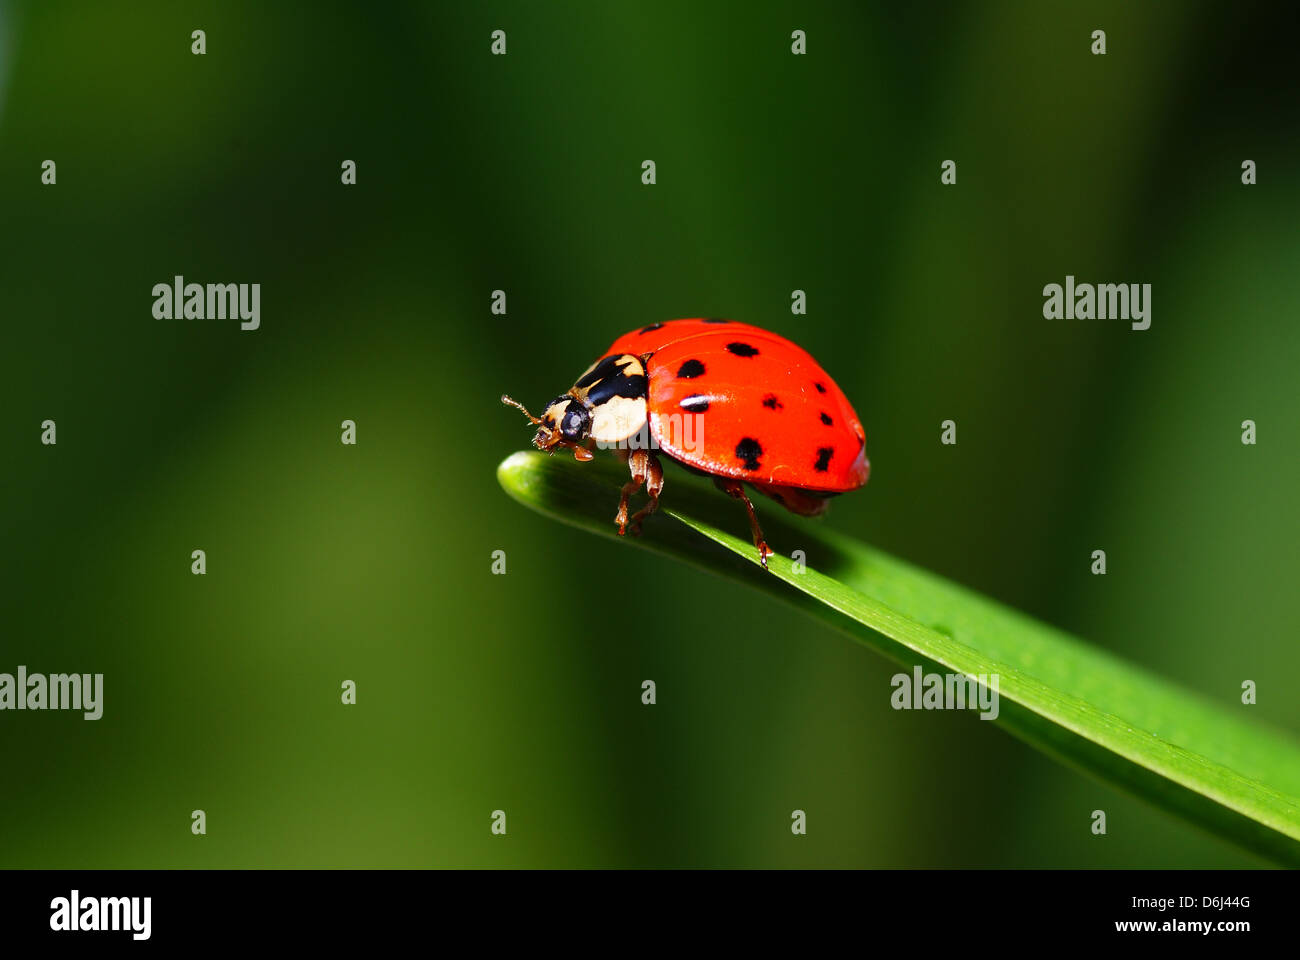 red speckled ladybird on green grass Stock Photo